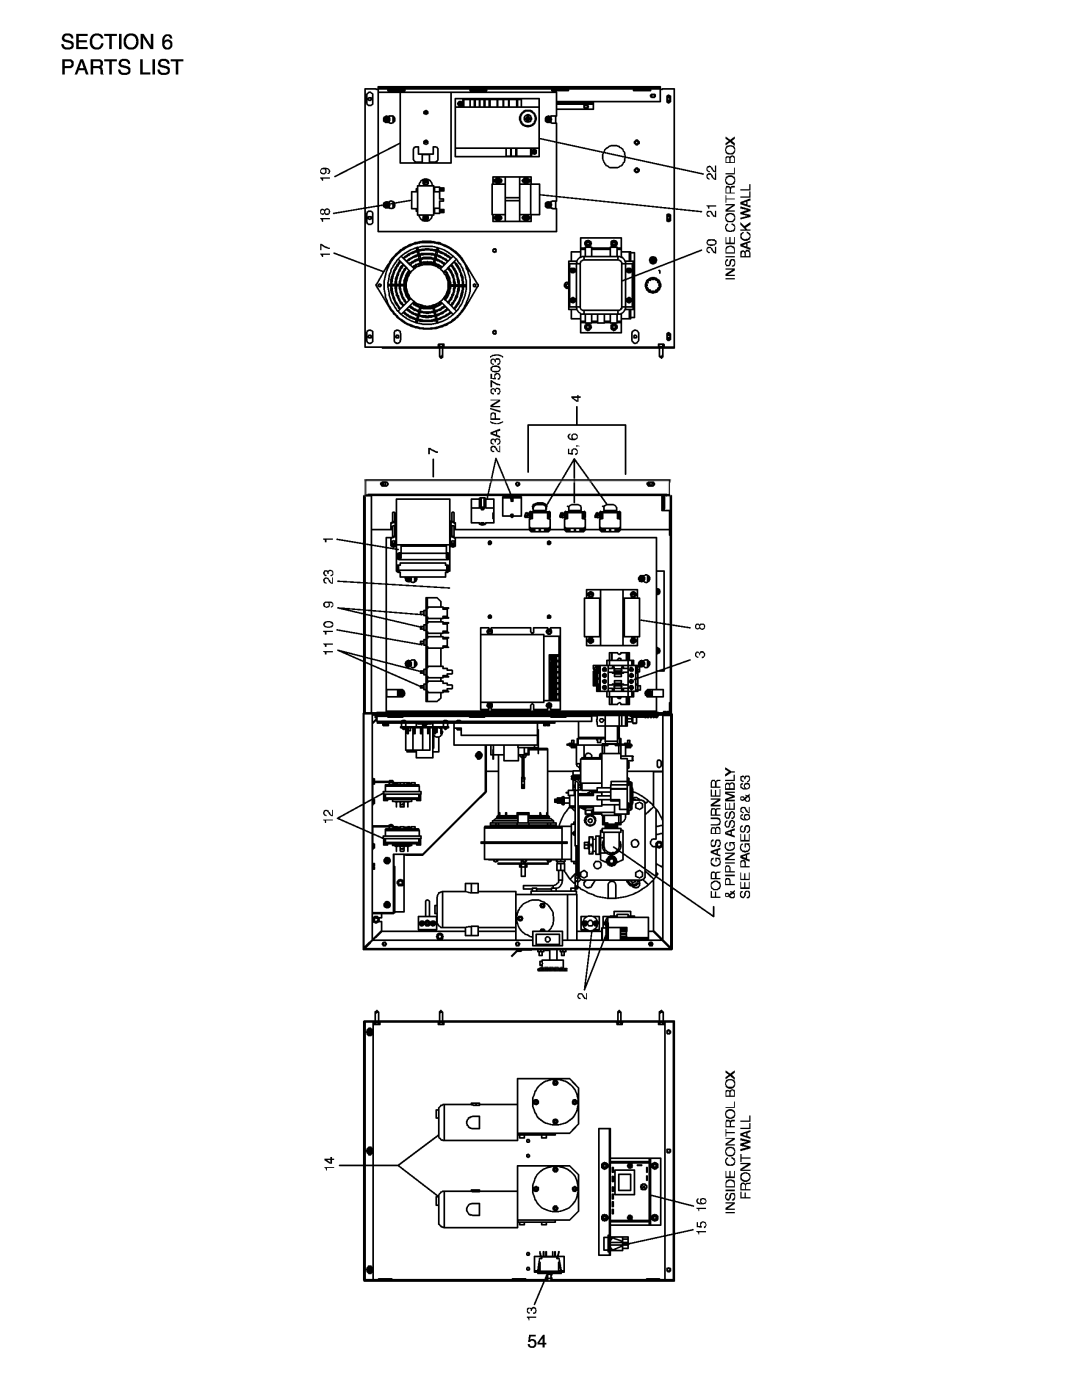 Middleby Marshall PS540G installation manual English, Section Parts List 